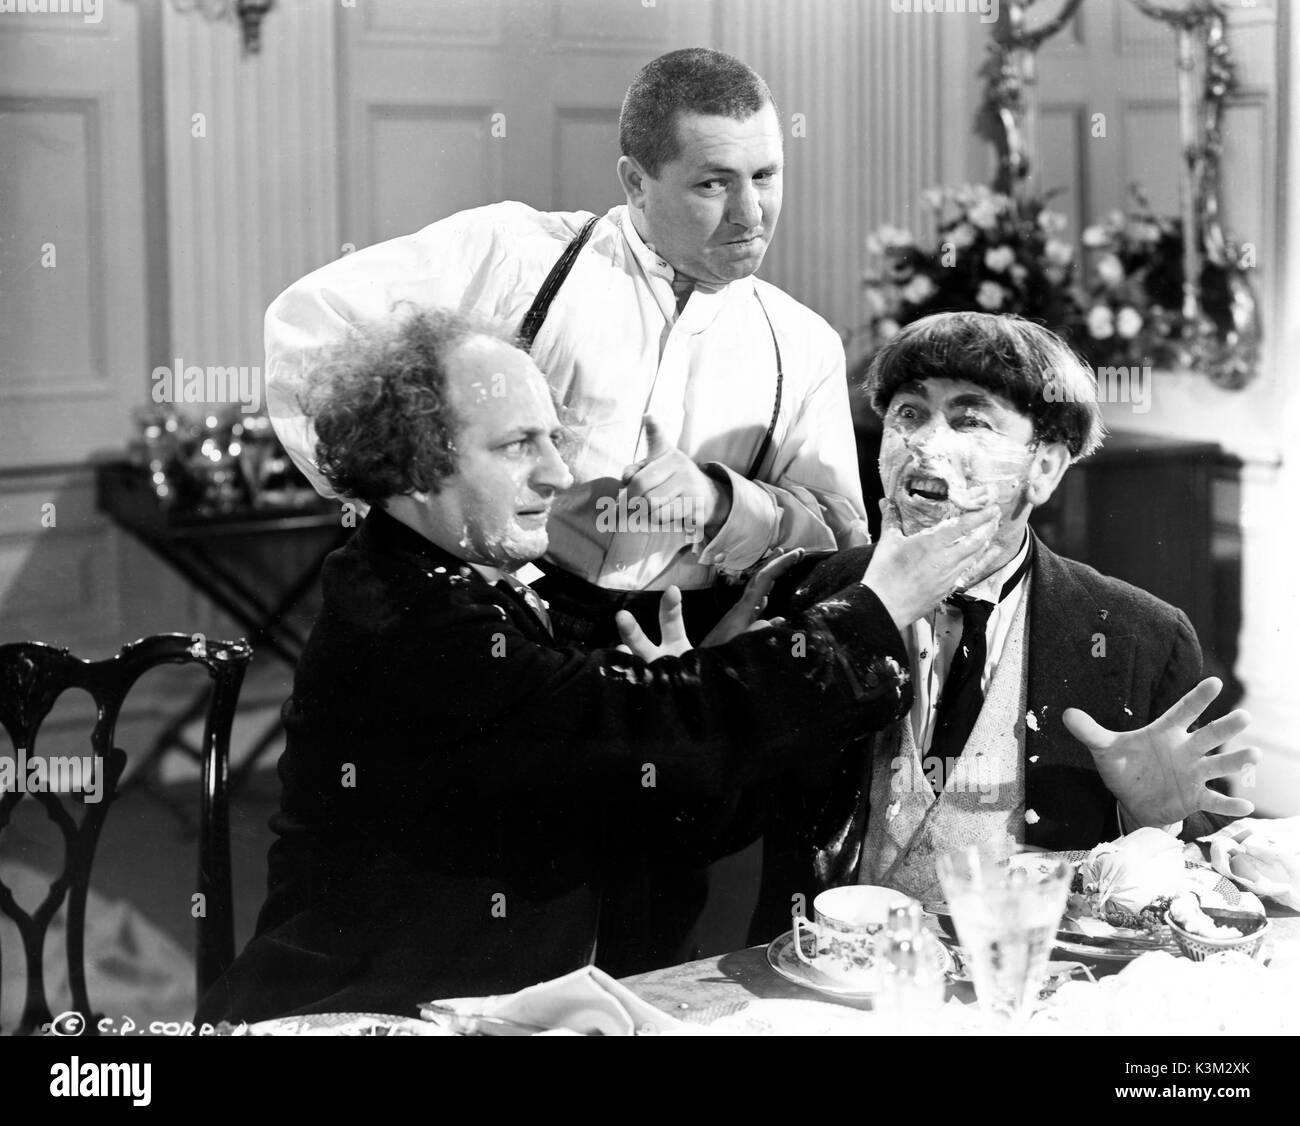 THE THREE STOOGES LARRY FINE, CURLY HOWARD, MOE HOWARD American vaudeville and screen comedy act in the early to mid C20th THE THREE STOOGES Stock Photo